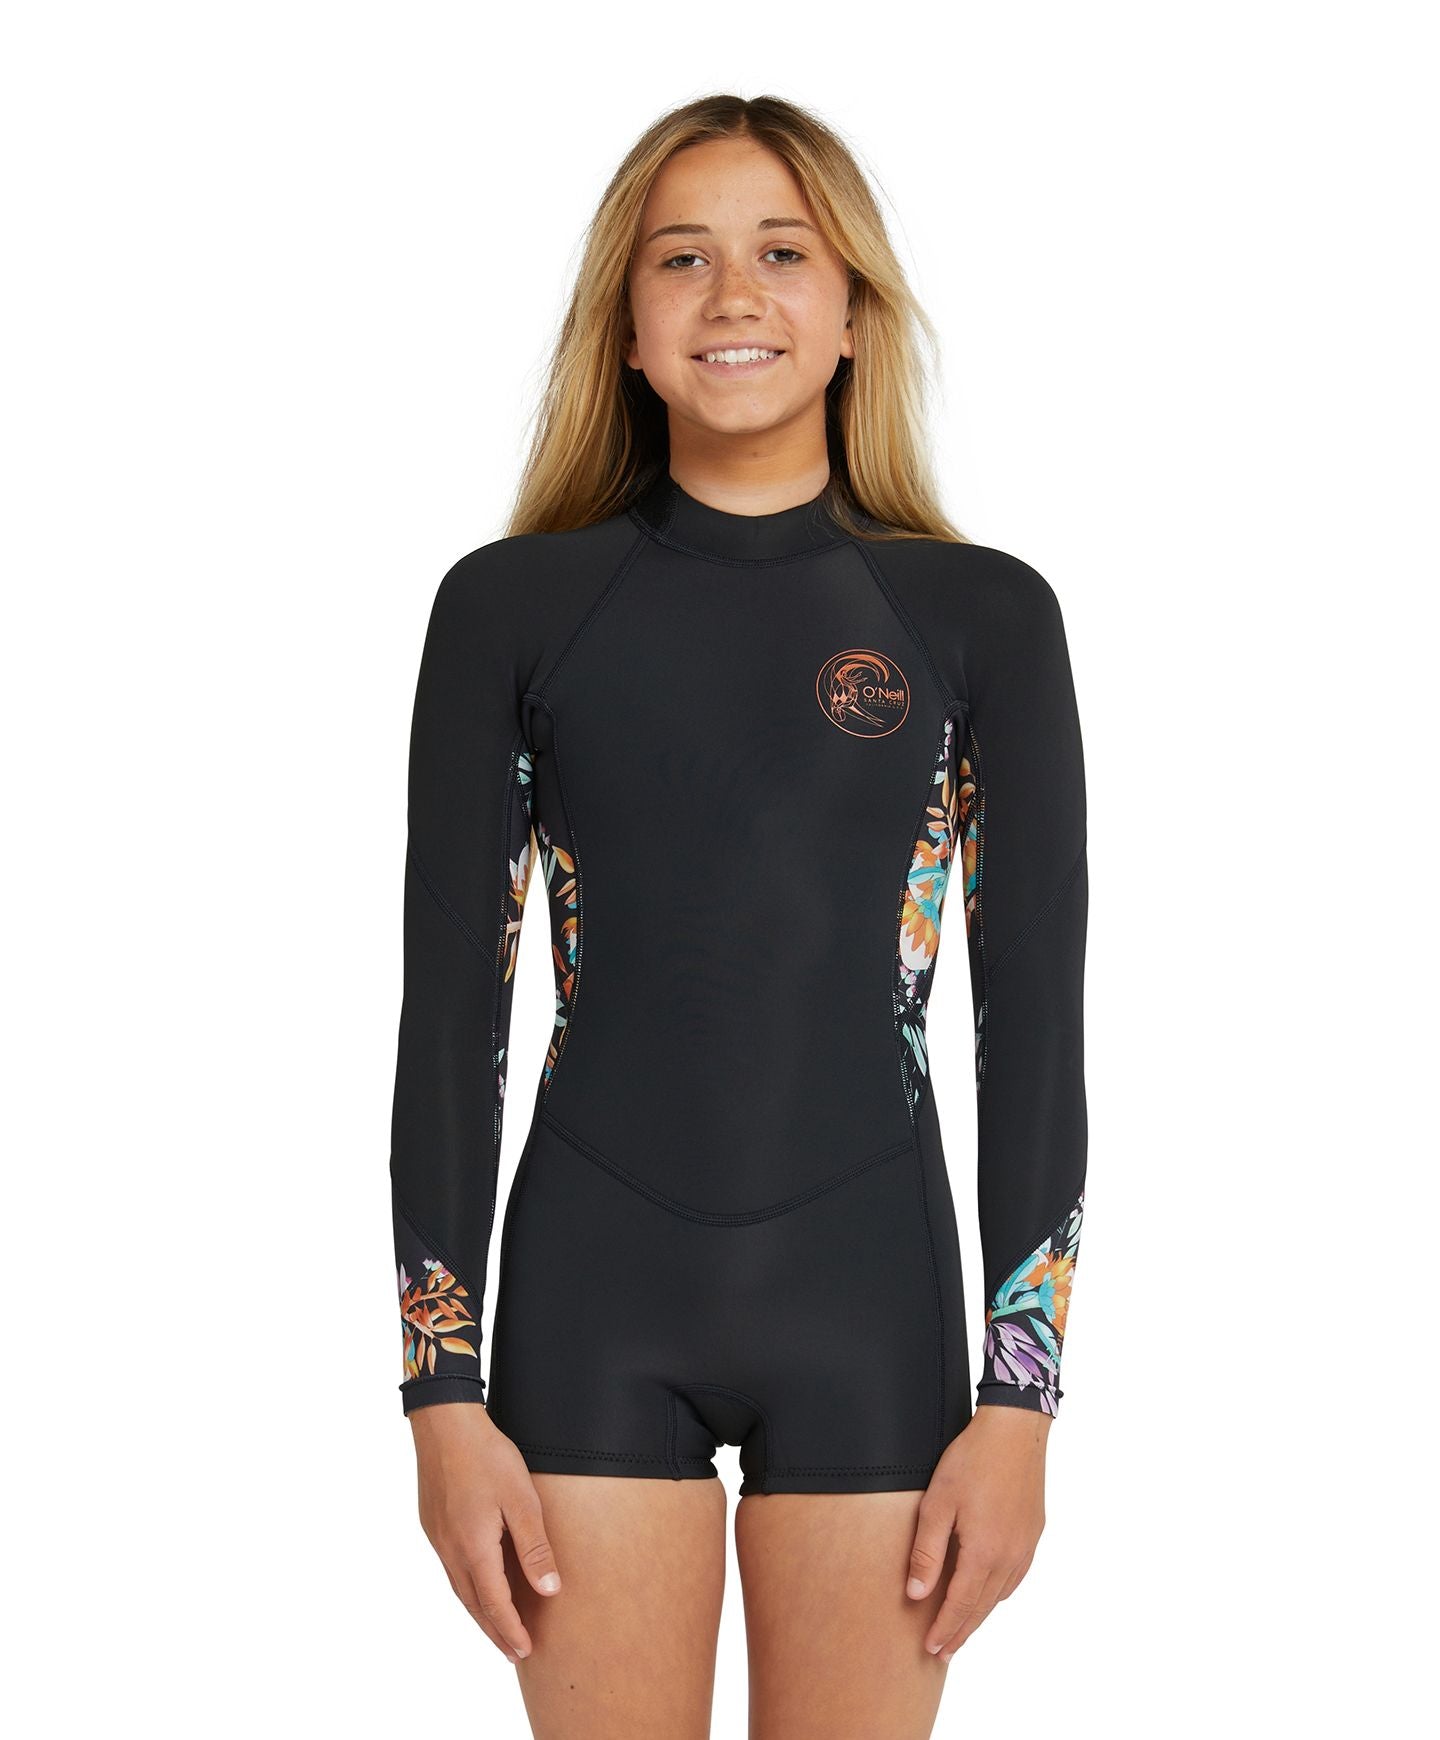 O'Neill Girls Bahia 2mm Mid LS Spring Wetsuit in black and australiana colourway